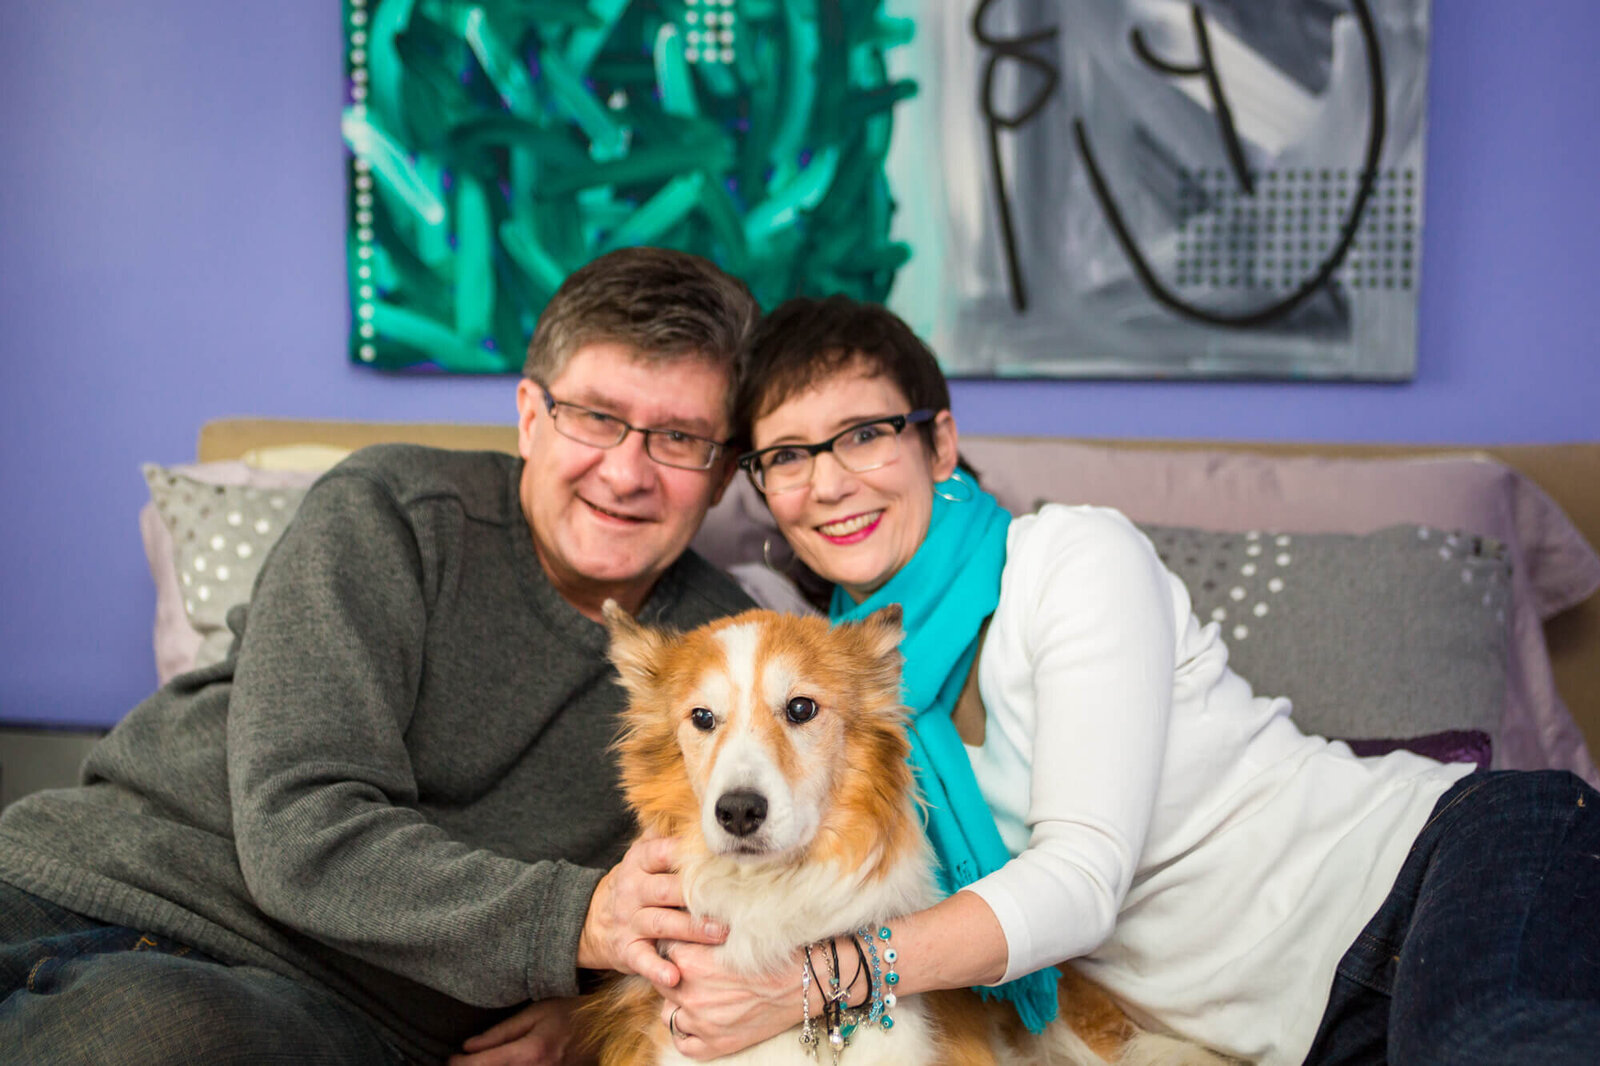 Indoor Family photo with dog